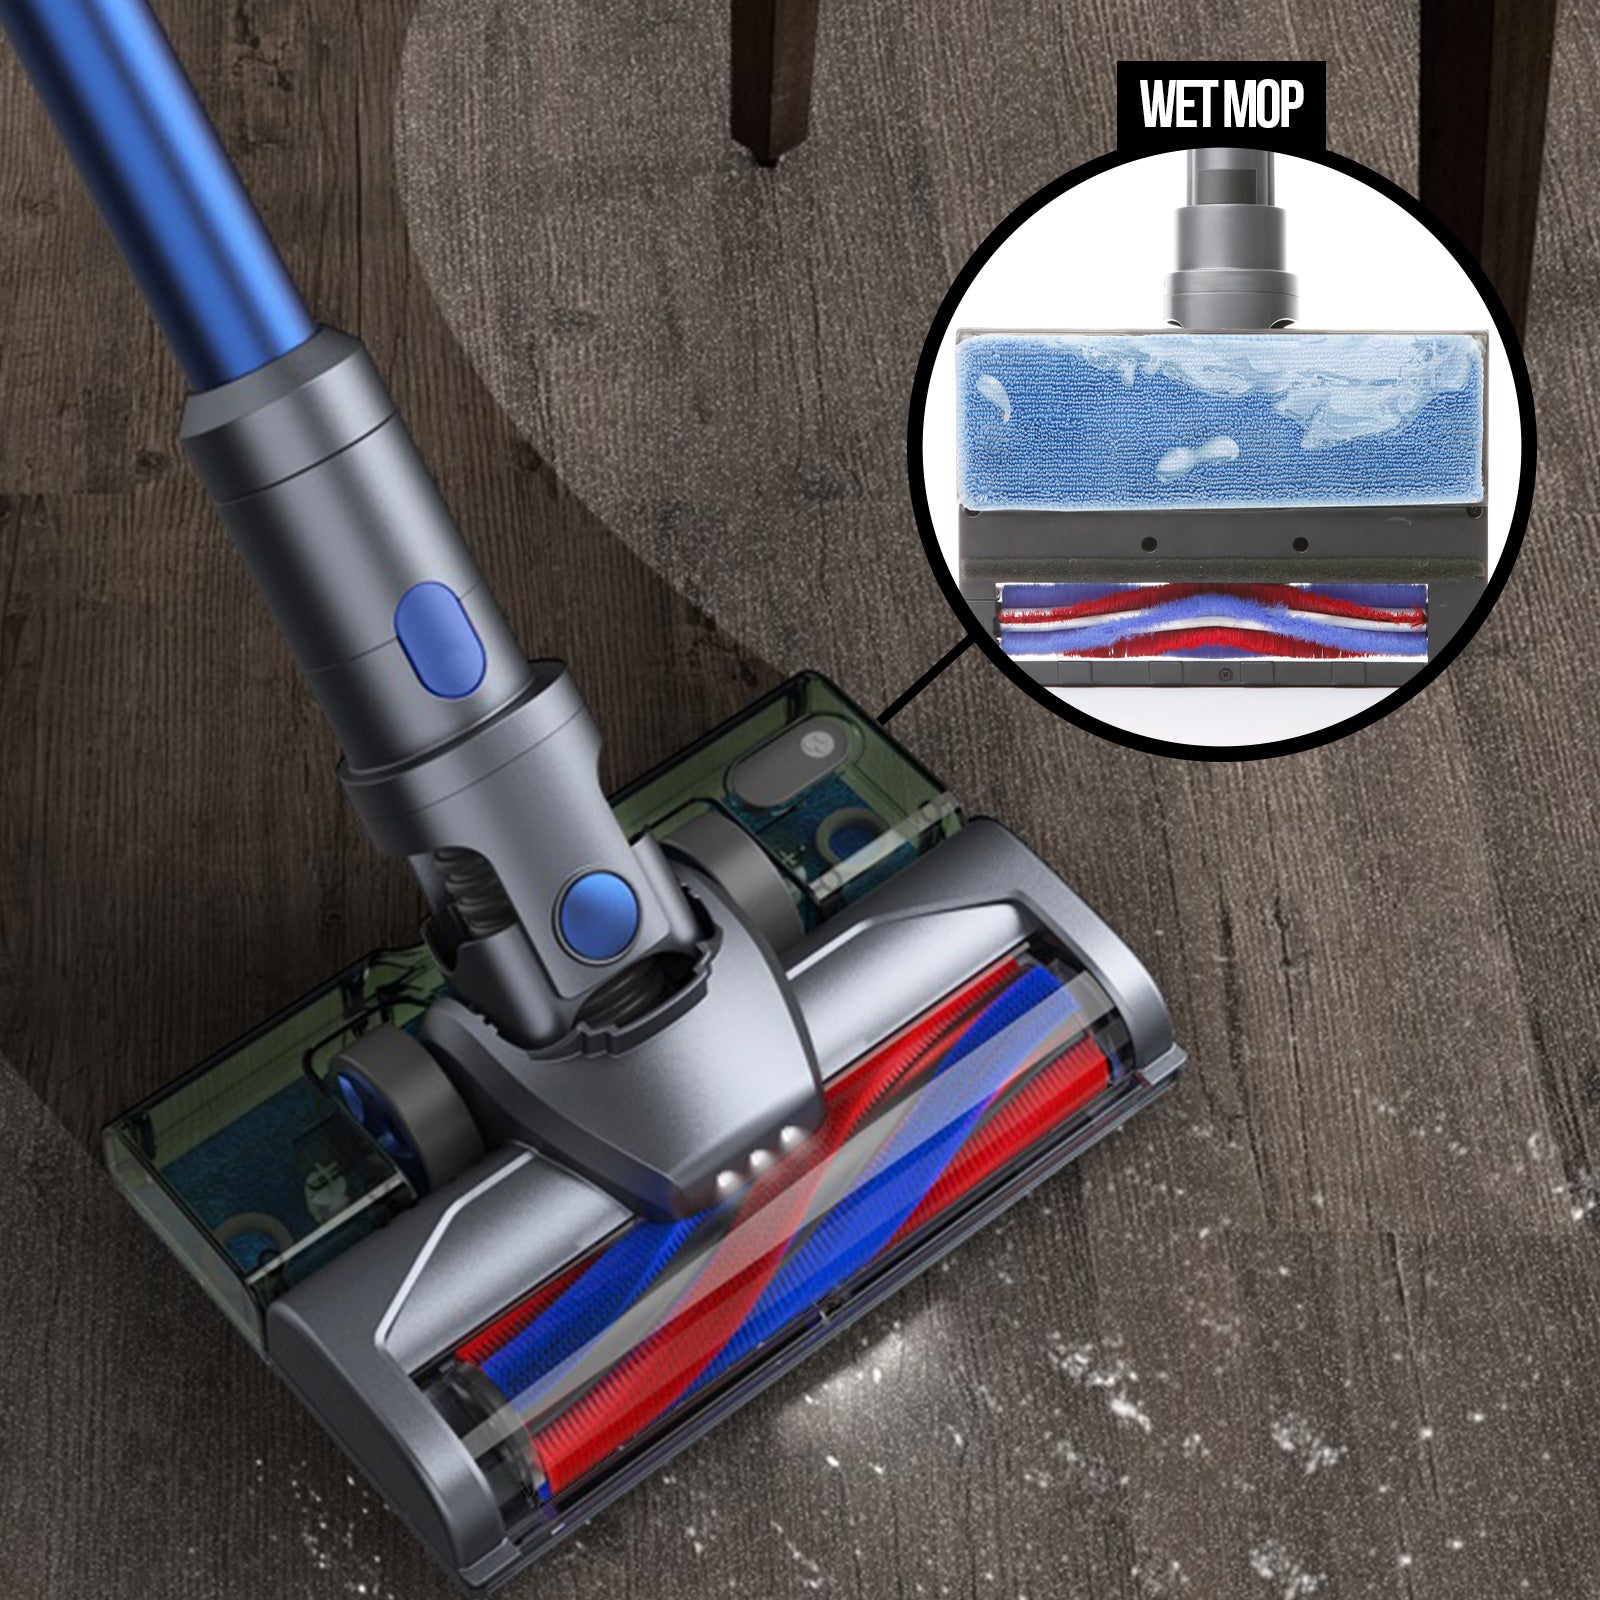 MyGenie H20 PRO Wet Mop 2-IN-1 Cordless Stick Vacuum Cleaner Handheld Recharge